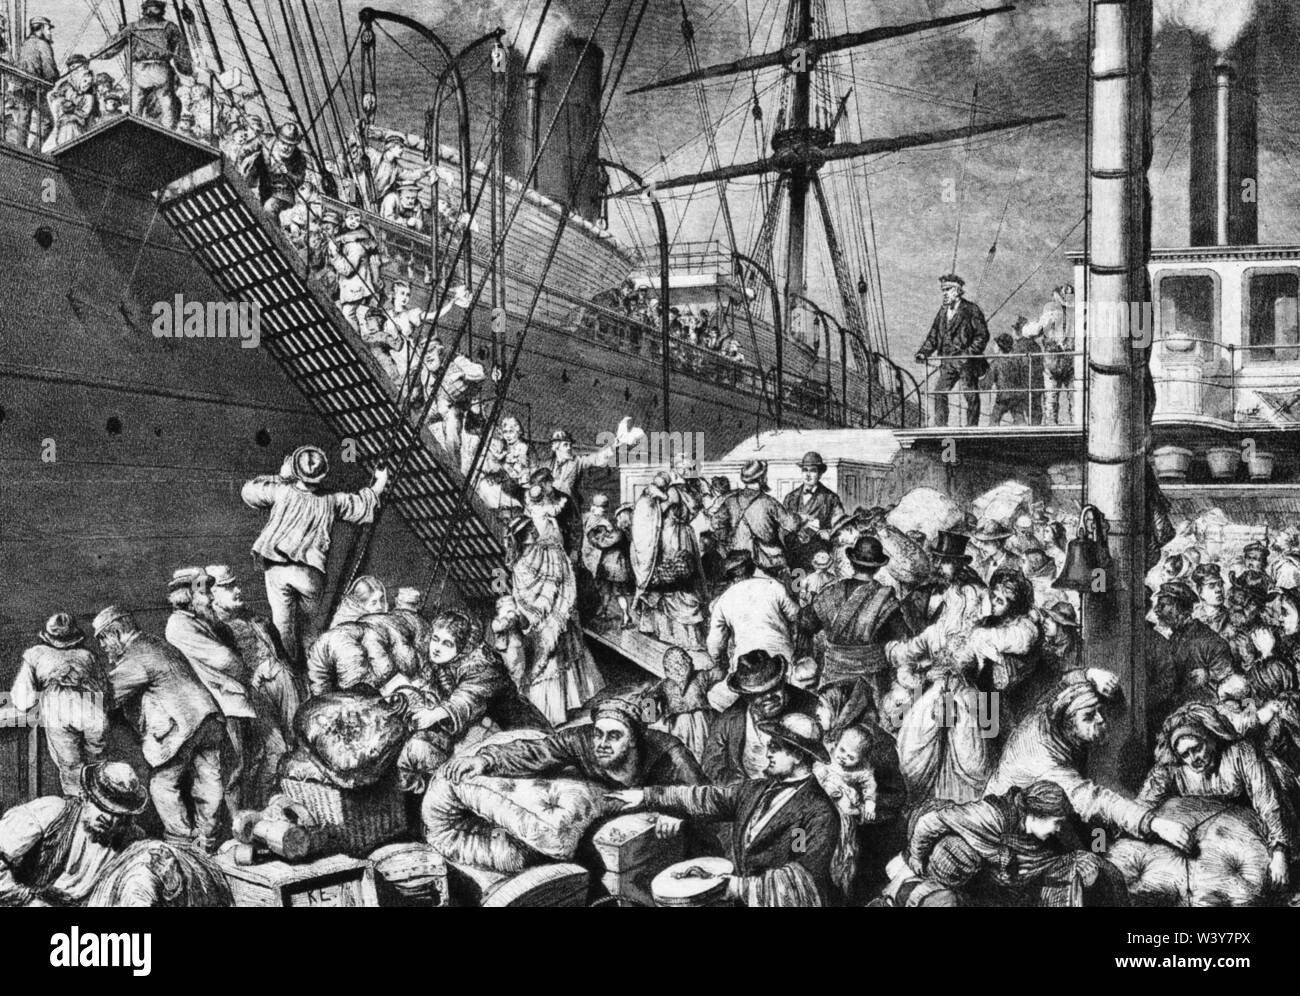 hamburg, germany - ca 1870: litograph depicting emigrants boarding a hapag steamer from a feeder ship - source: 1937 commemorative publication on ocas Stock Photo